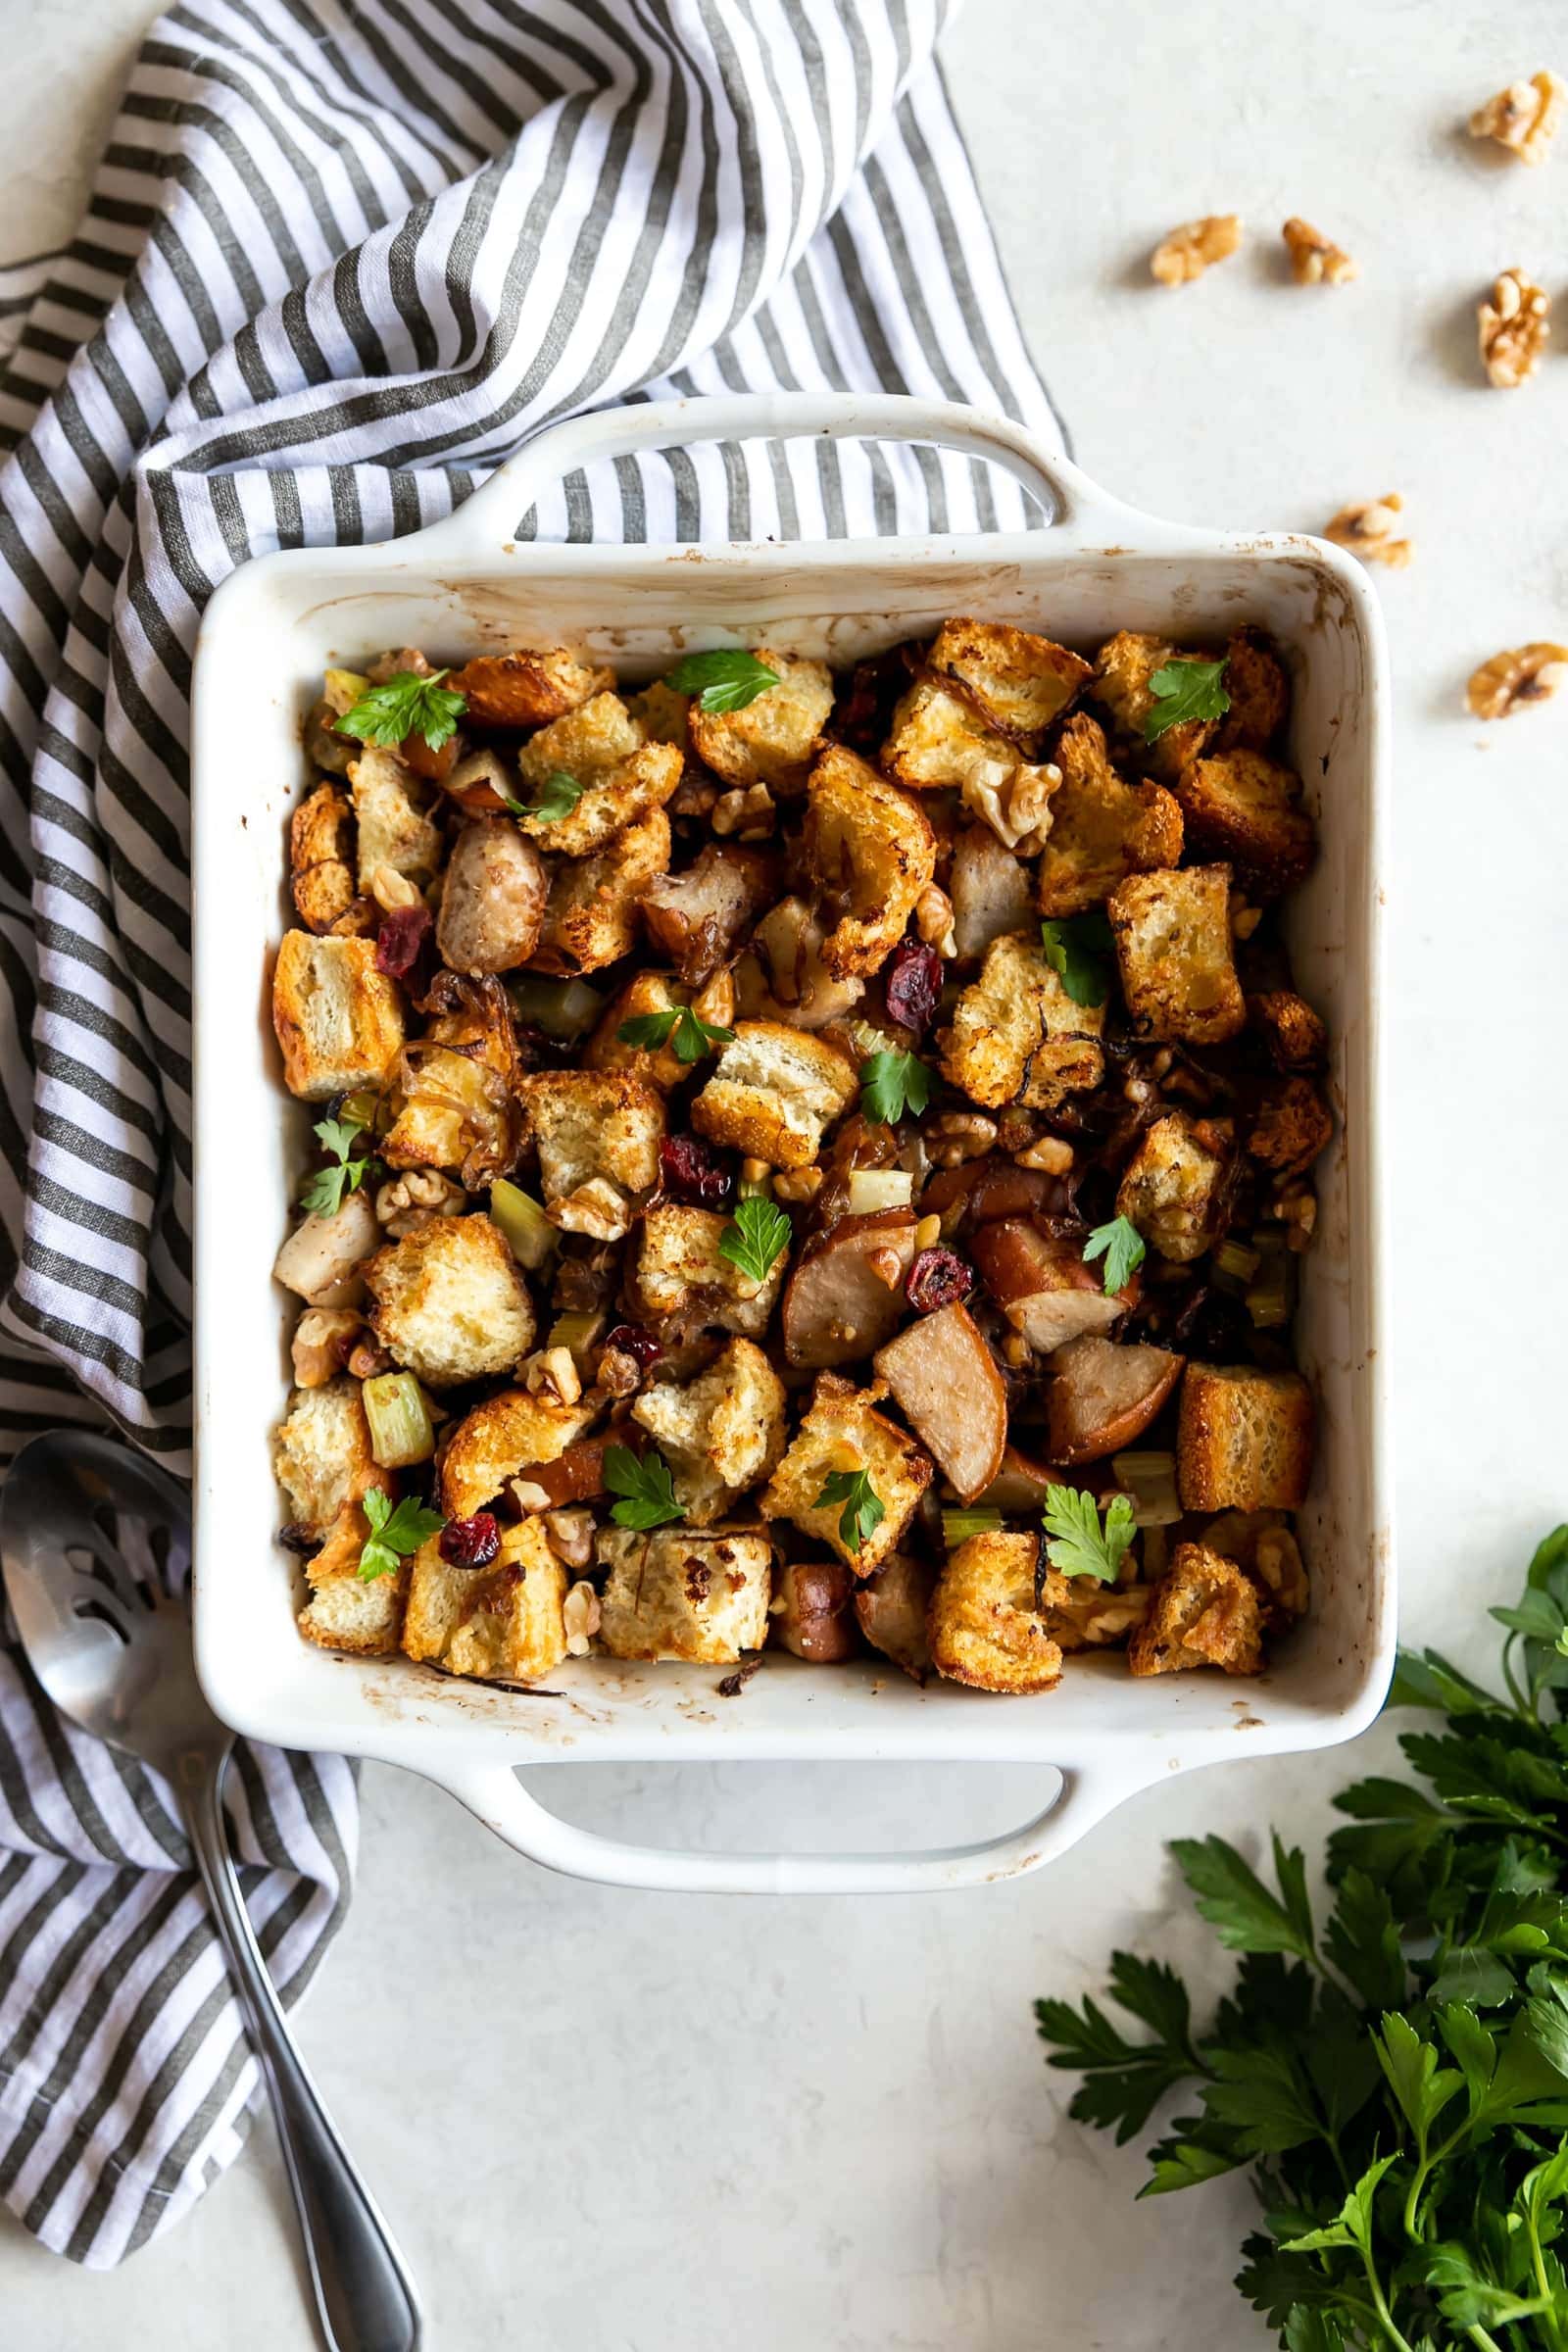 Caramelized Onion Pear & Walnut Stuffing. A flavorful and easy-to-make Thanksgiving stuffing made with caramelized onions, pears, celery, walnuts, and dried cranberries.